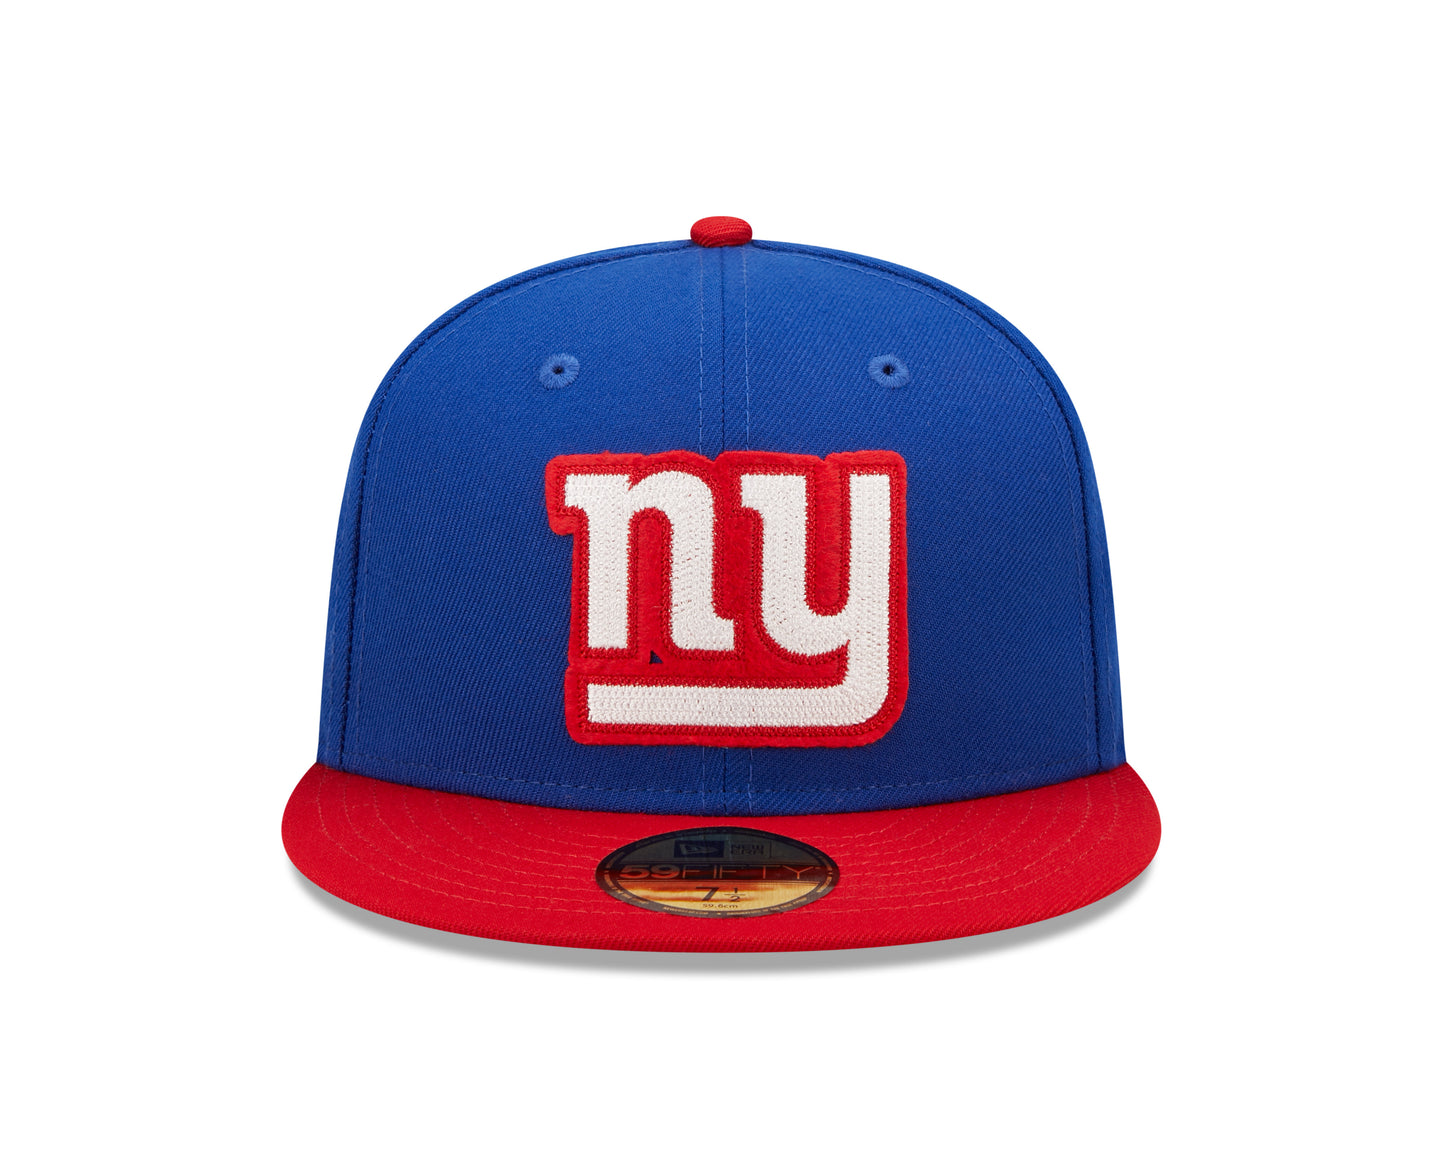 New York Giants New Era Super Bowl Series Letterman 59FIFTY Fitted Hat - Blue